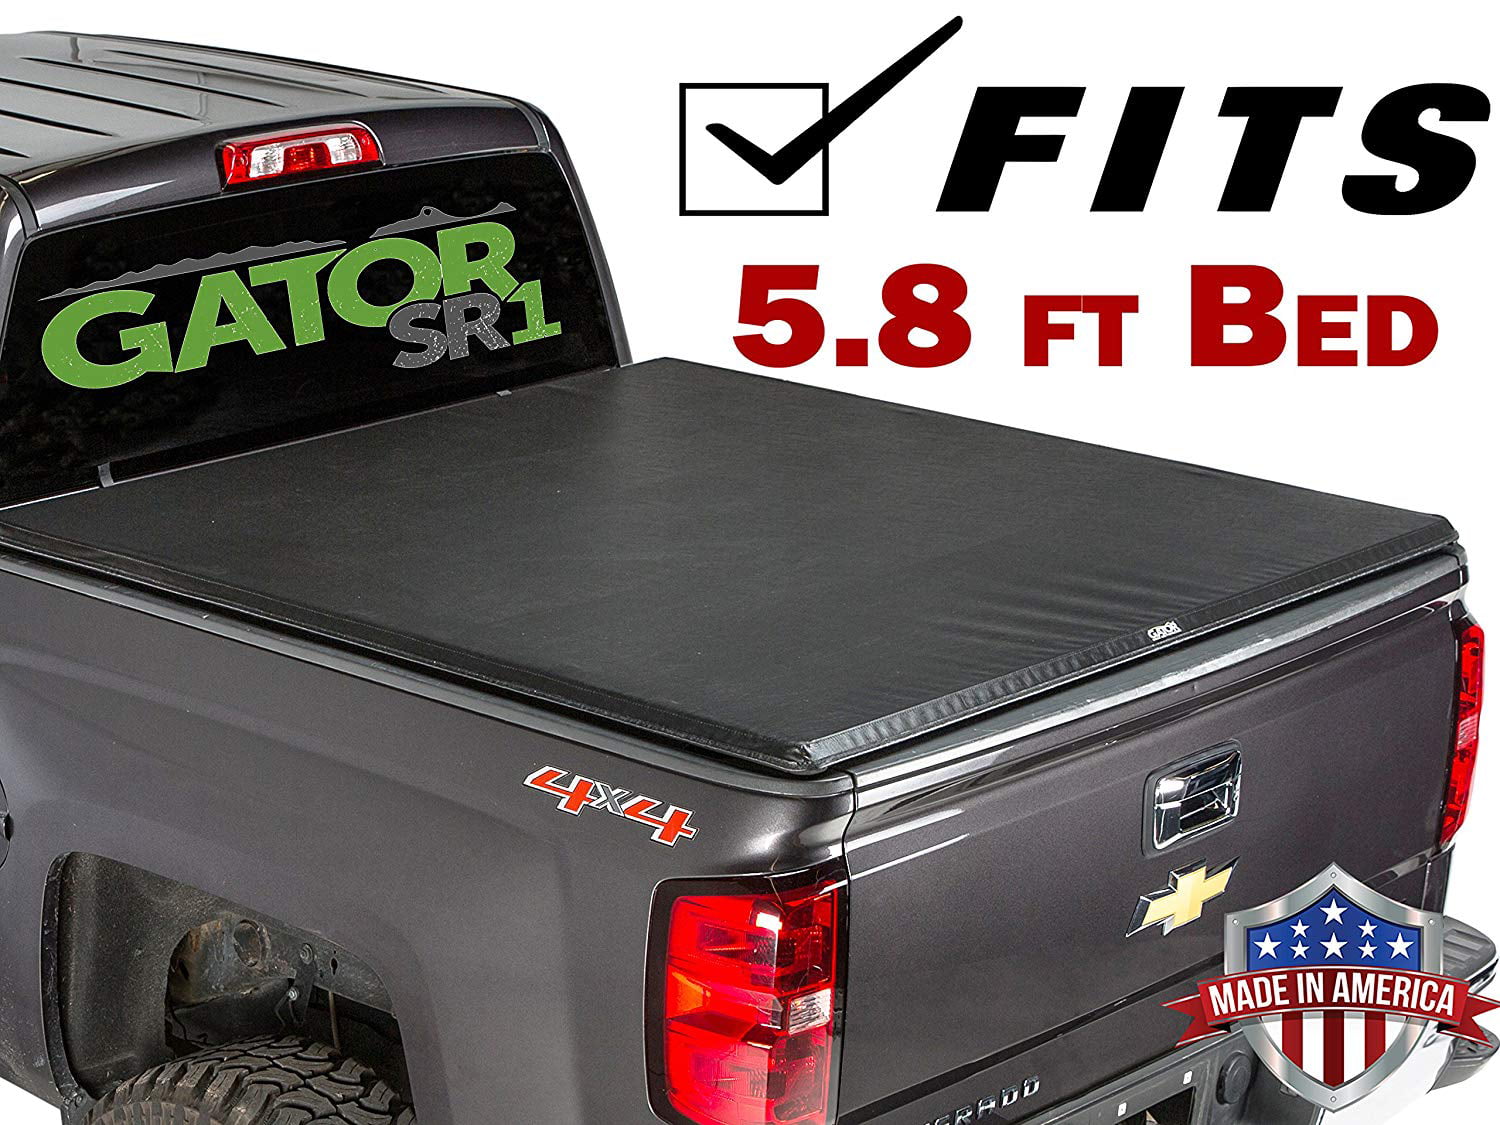 Gator ETX Soft Roll Up Truck Bed Tonneau Cover Made in the USA 5.8 Bed 137245 New Body Style fits 2019 GMC Sierra/Chevy Silverado 1500 